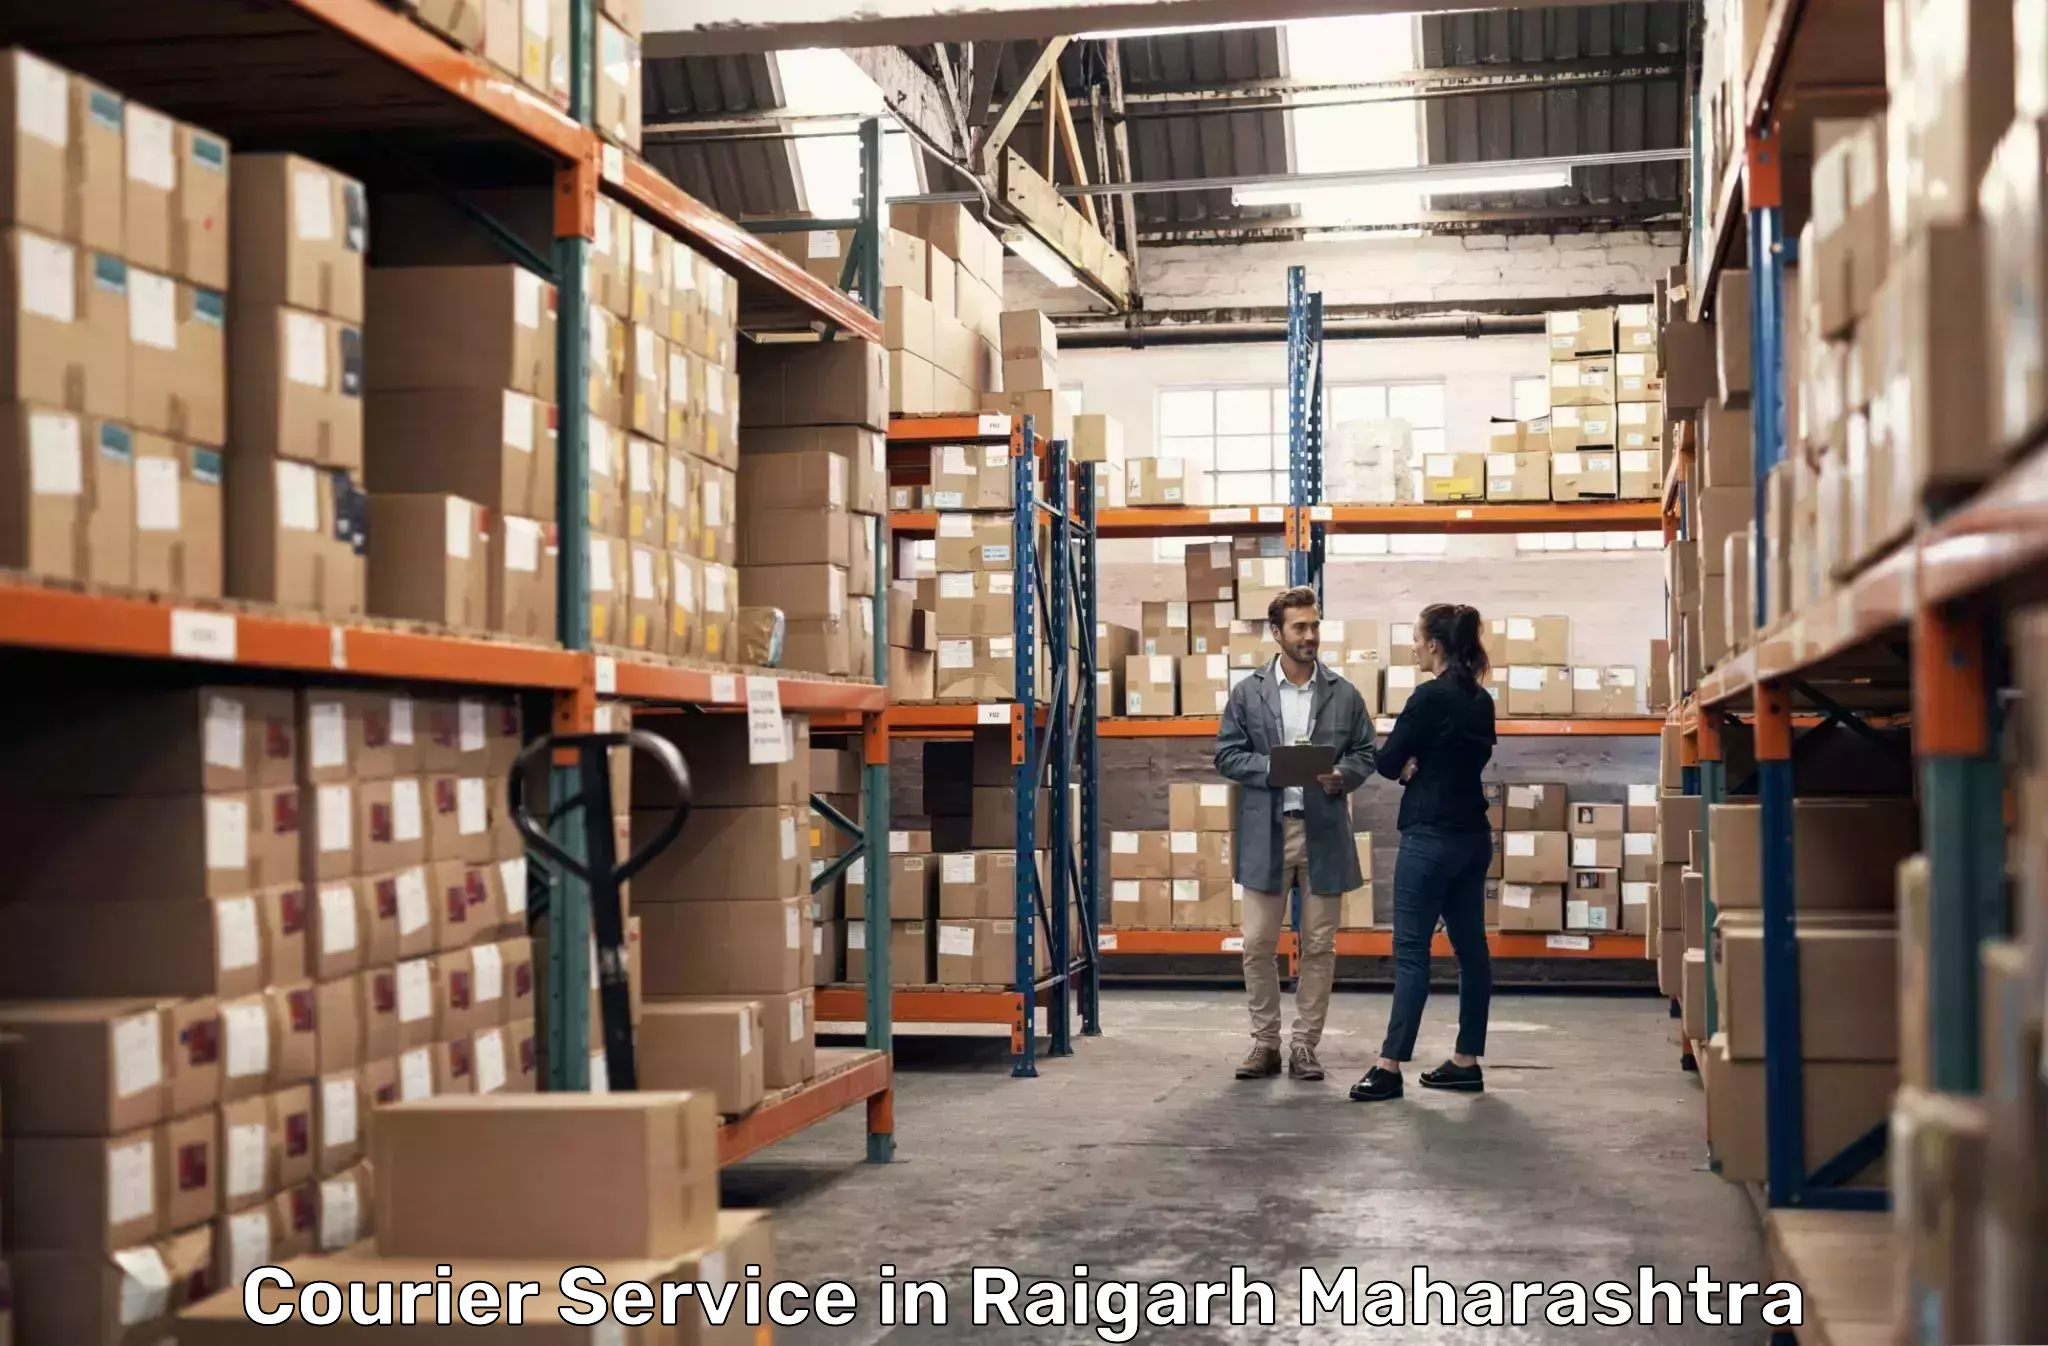 Round-the-clock parcel delivery in Raigarh Maharashtra